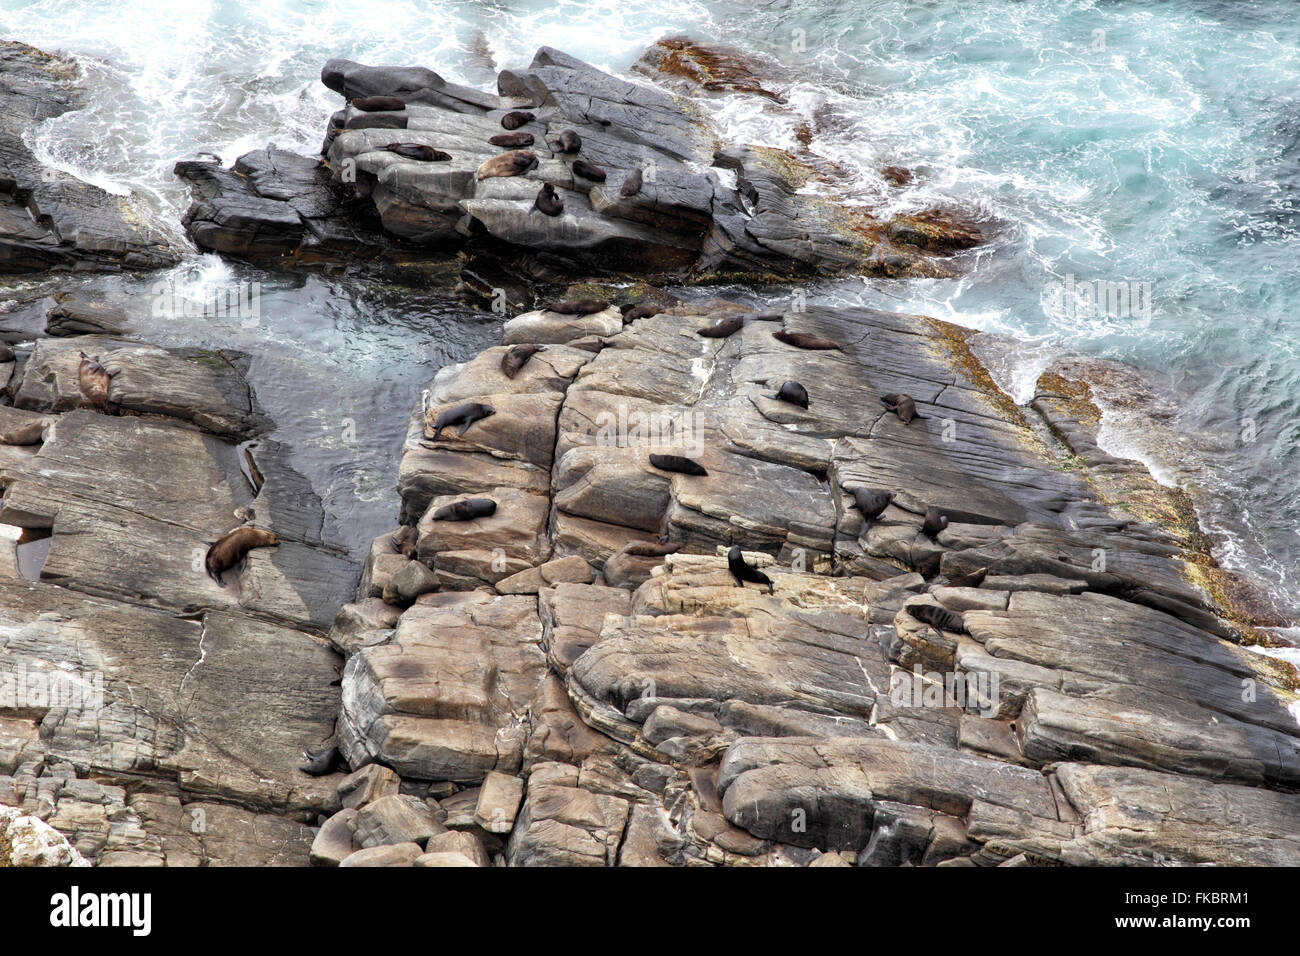 Colony of New Zealand Fur Seals (Arctocephalus forsteri) at Cape du Couedic in the Flinders Chase National Park on Kangaroo Isla Stock Photo